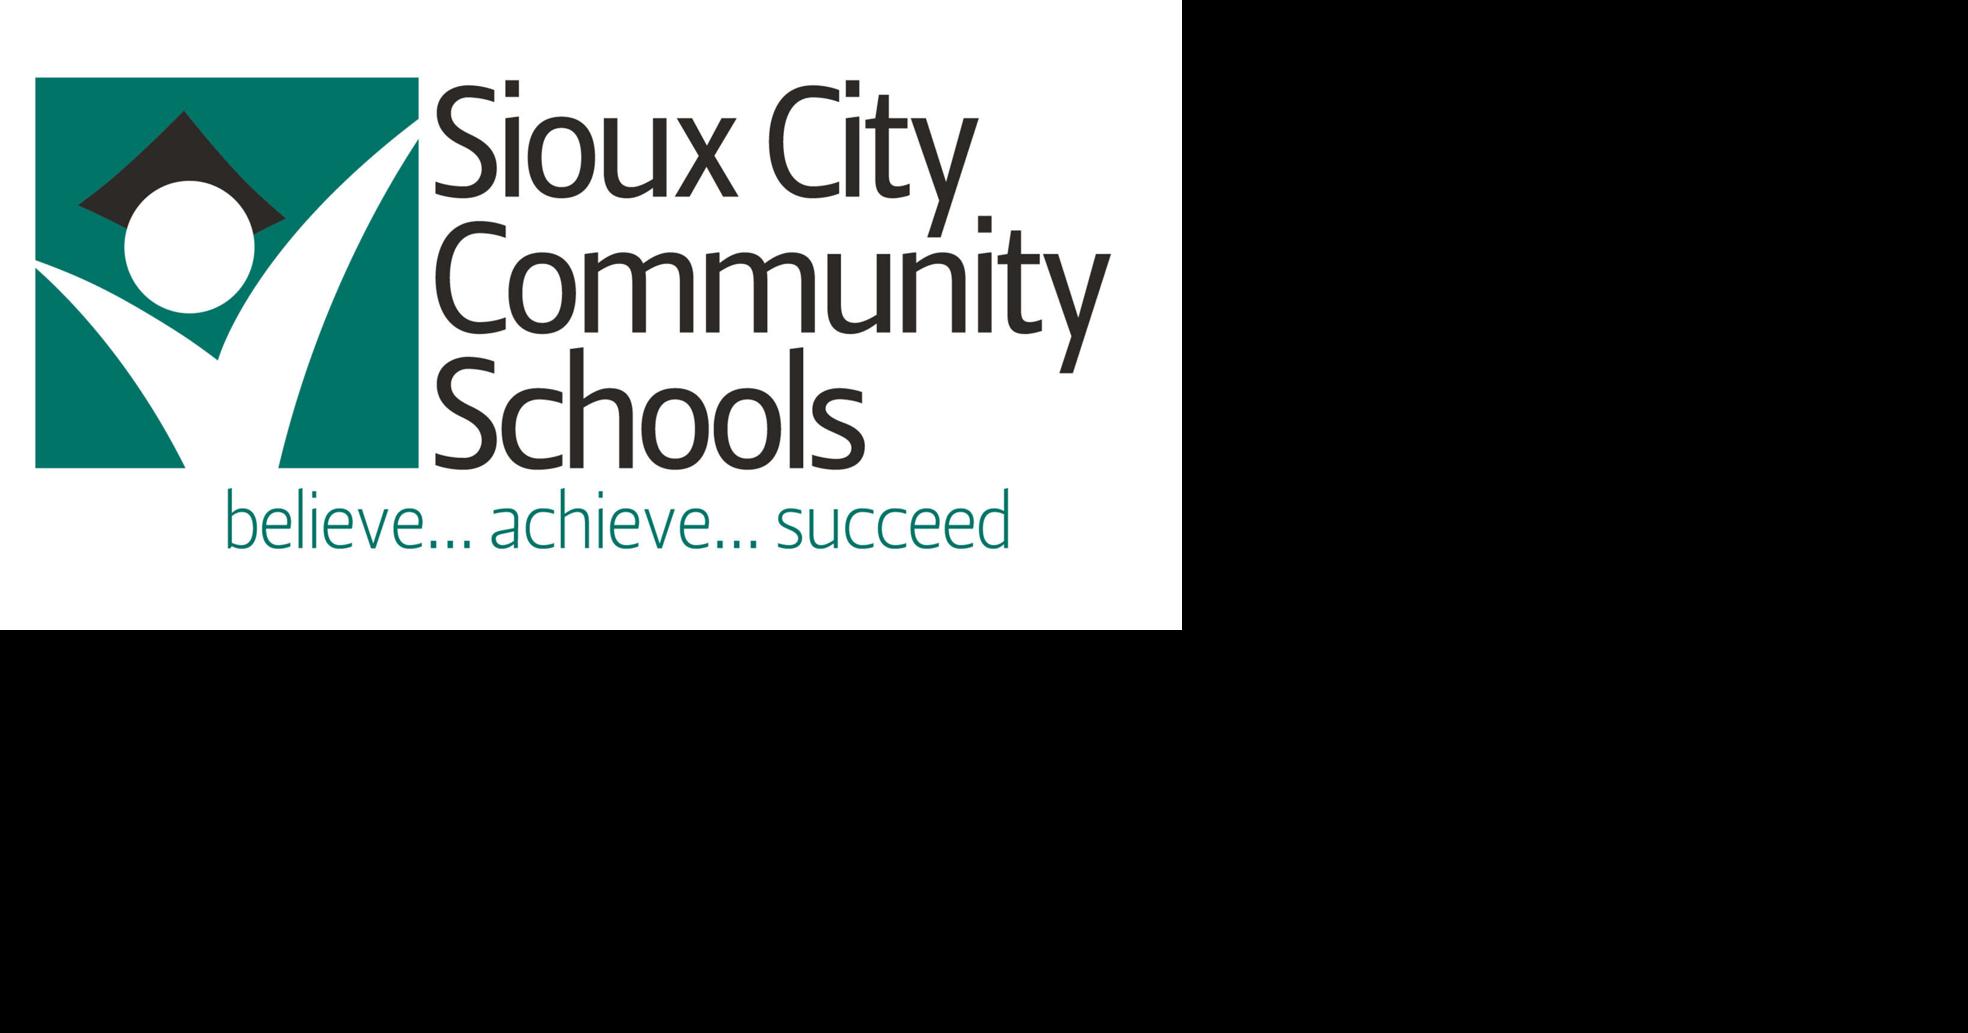 Fourteen candidates vying for vacant Sioux City school board seat Photo